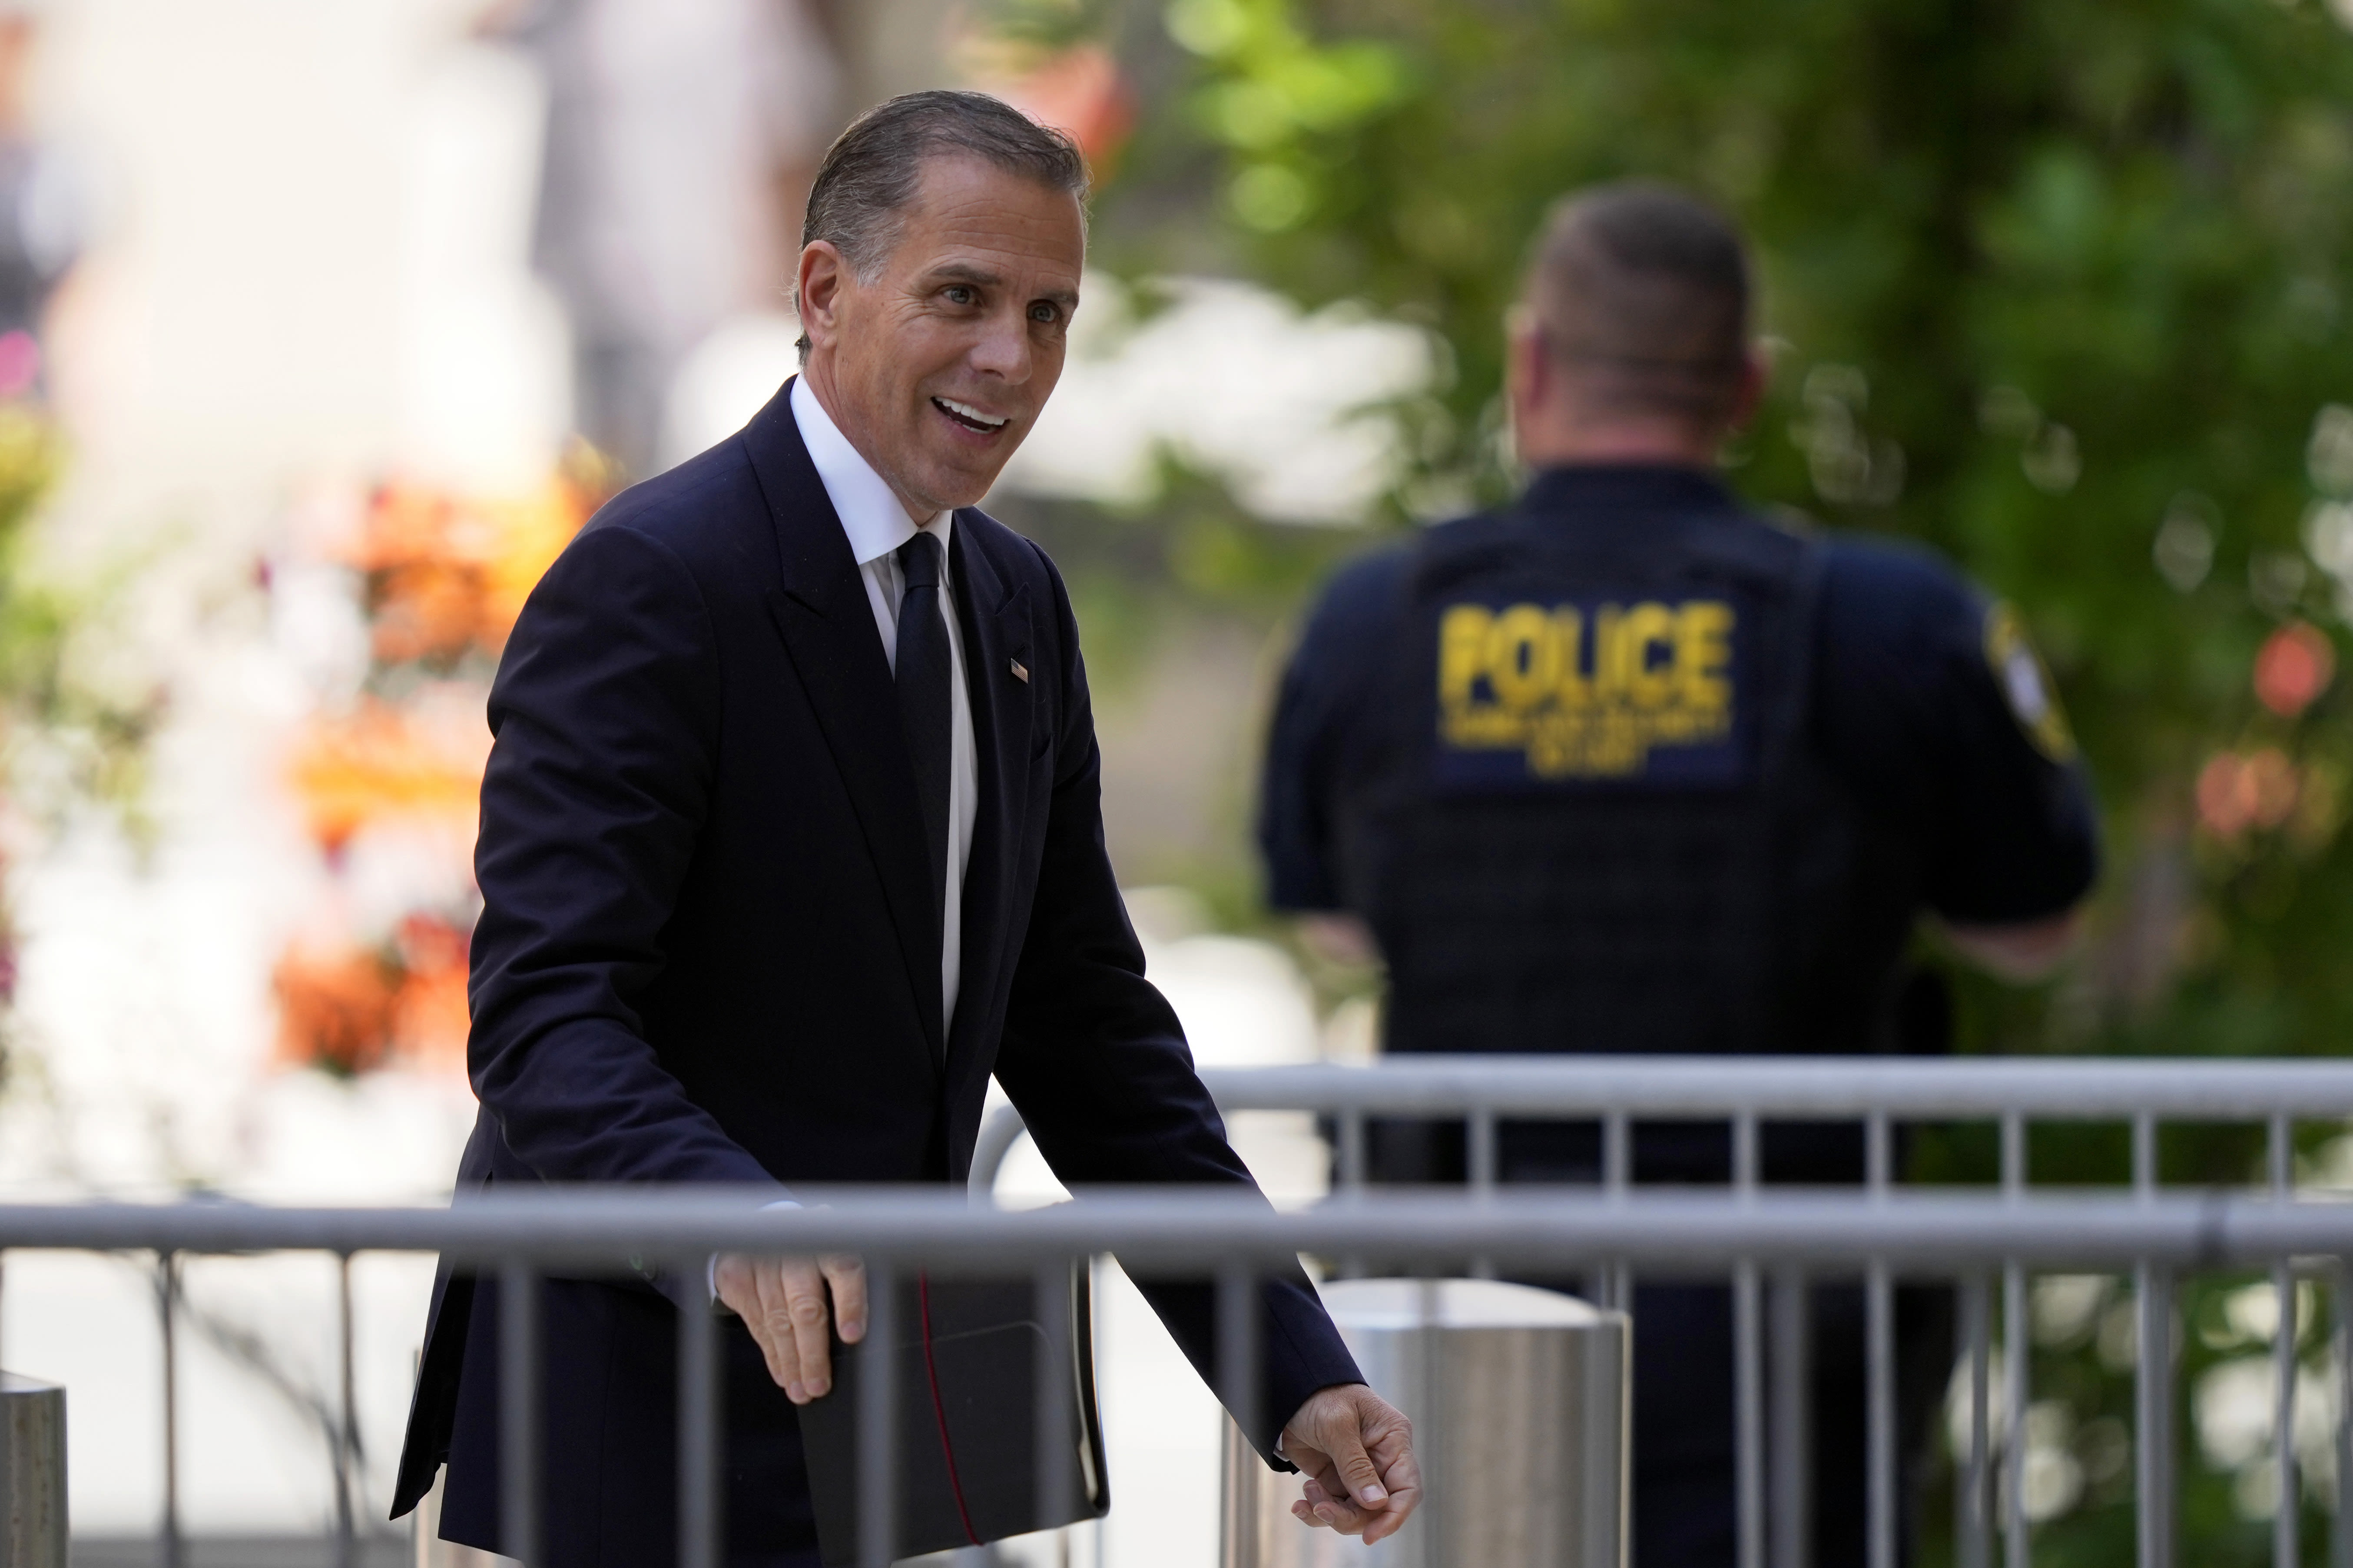 Hunter Biden’s gun trial starts today. Here’s what to know.